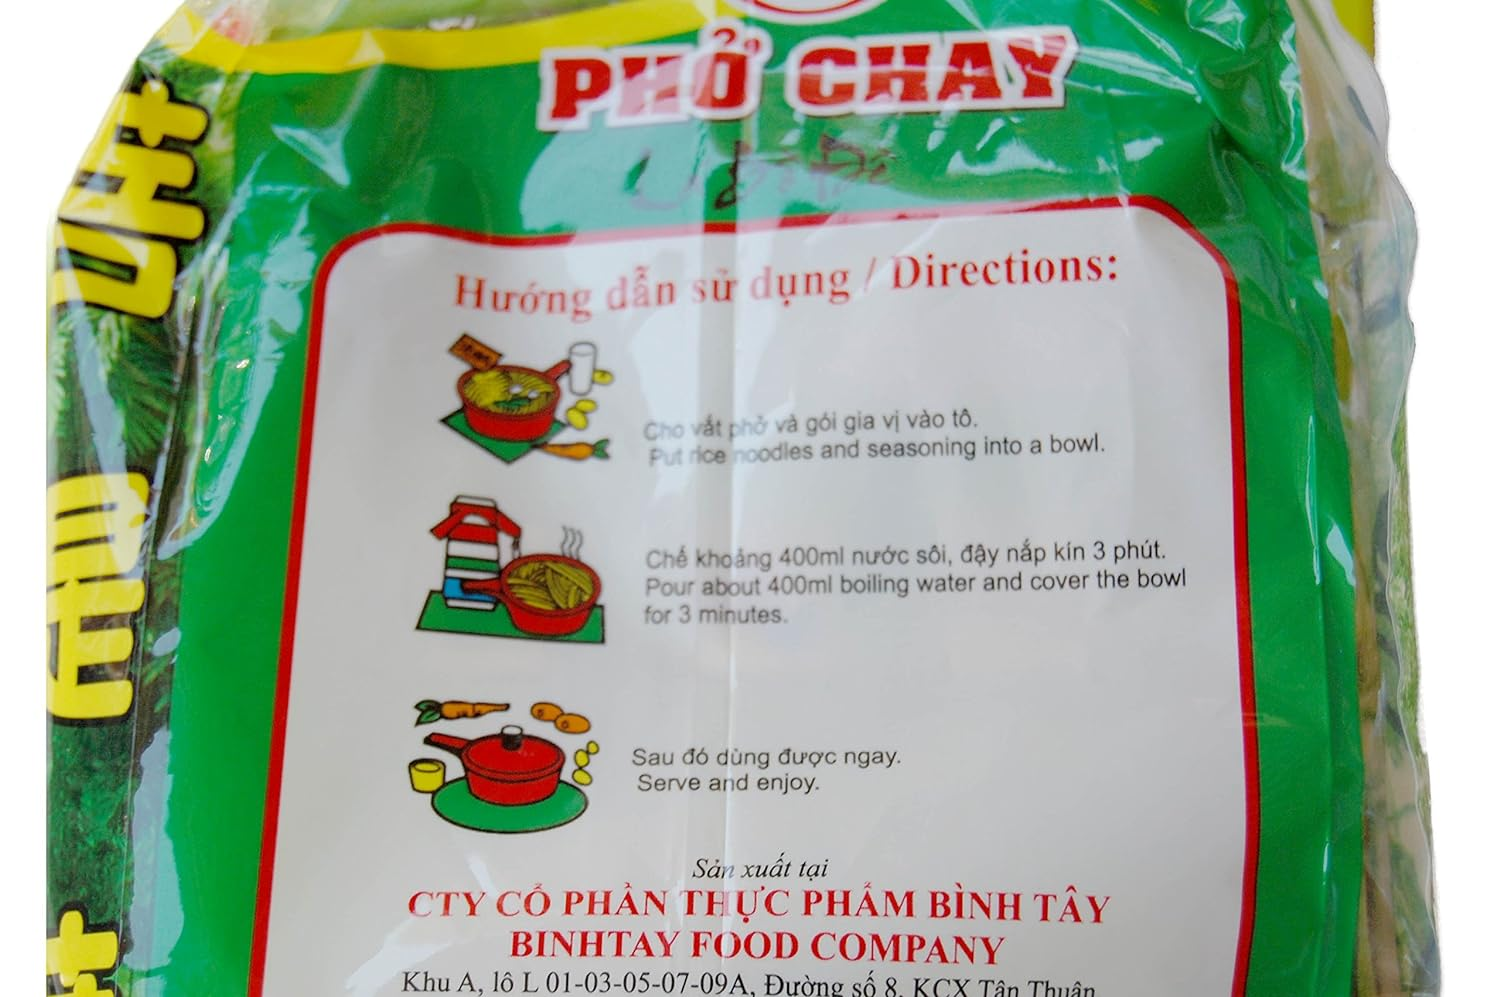 Binh Tay Pho Chay Vegetarian Instant Rice Noodles